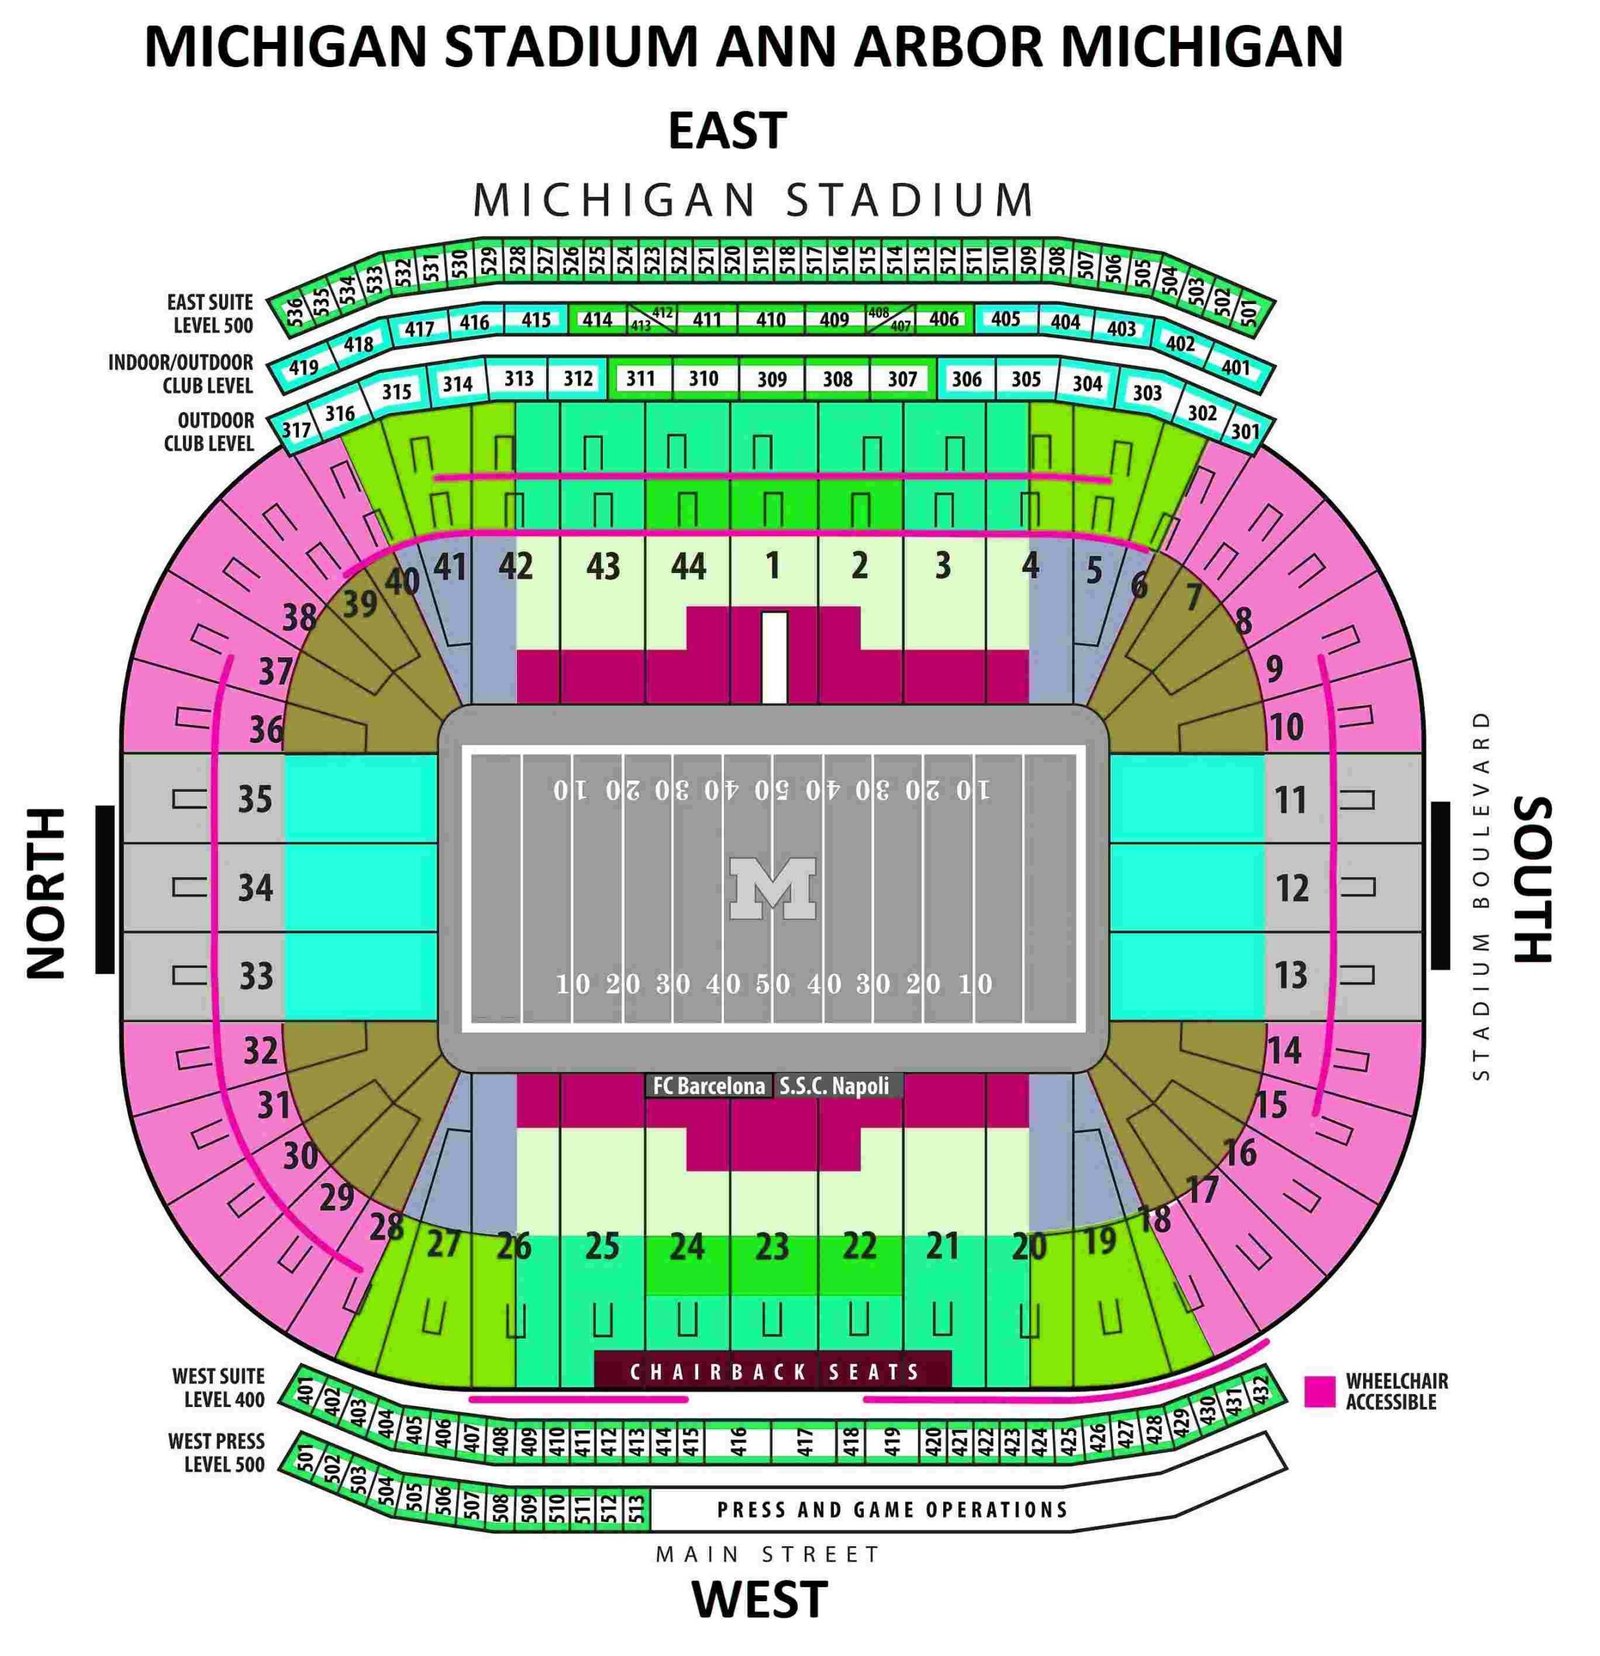 Beaver Stadium Seating Chart With Rows And Seat Numbers Matttroy